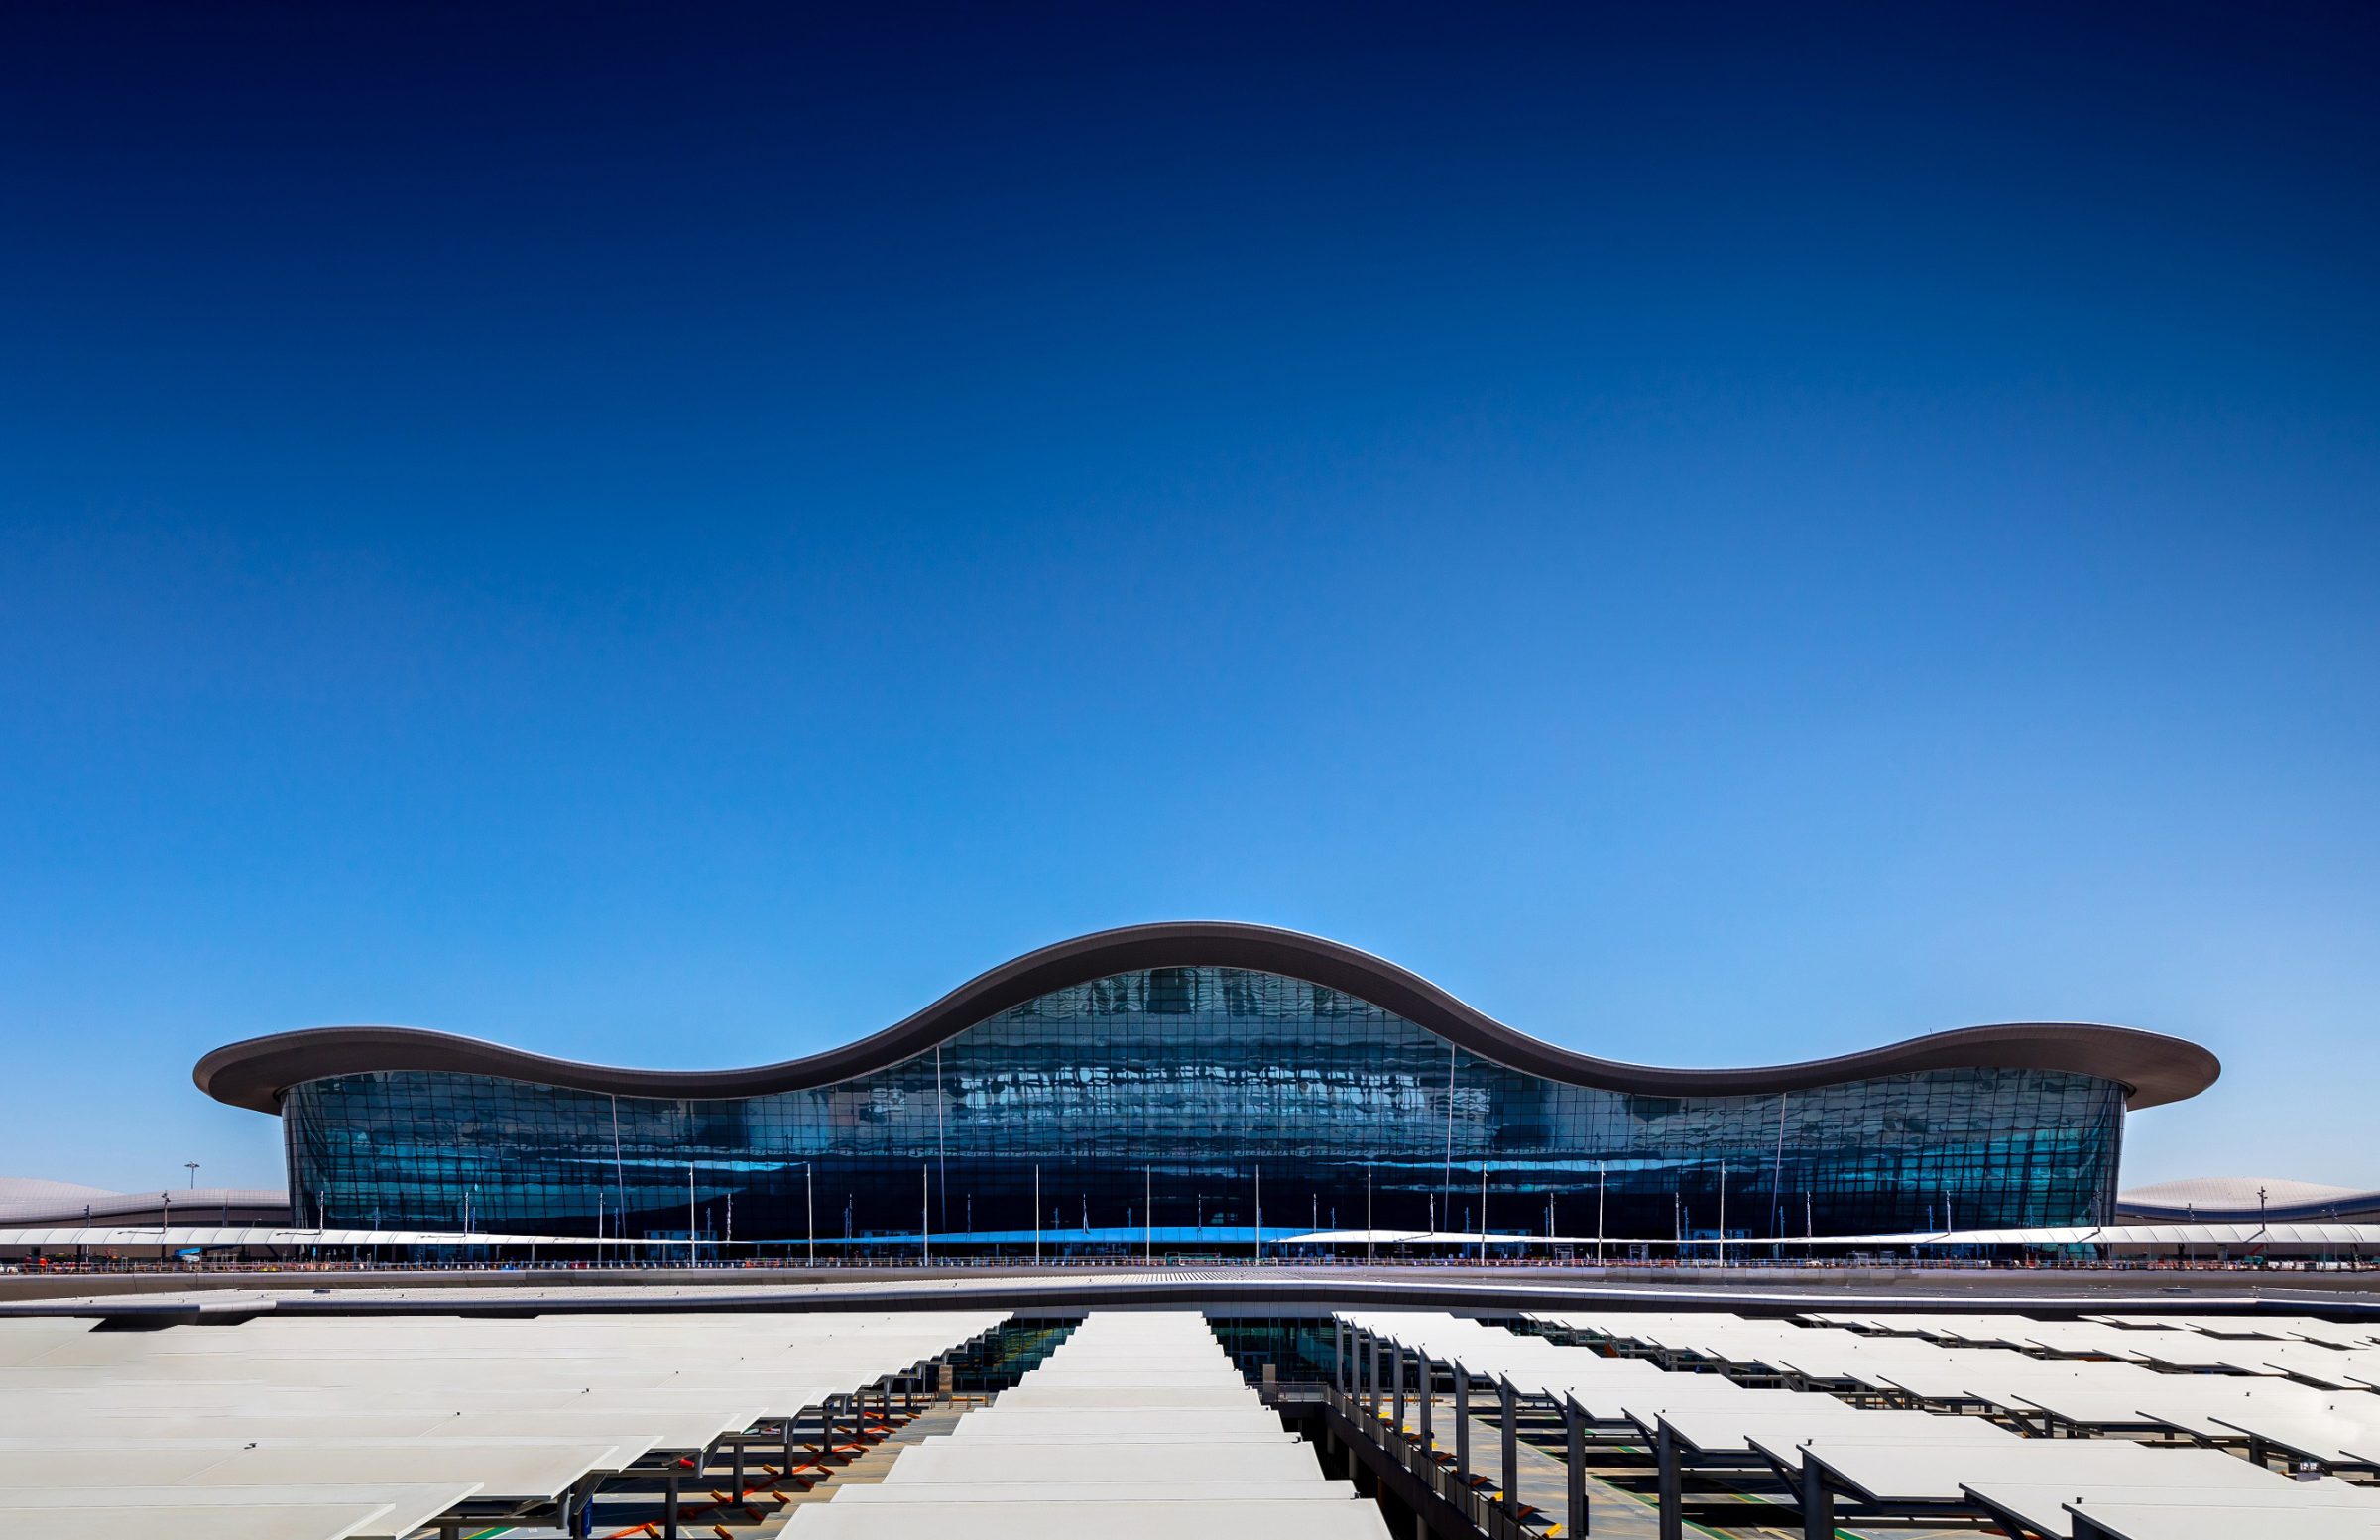 Another globally iconic building brand launch – Zayed International Airport